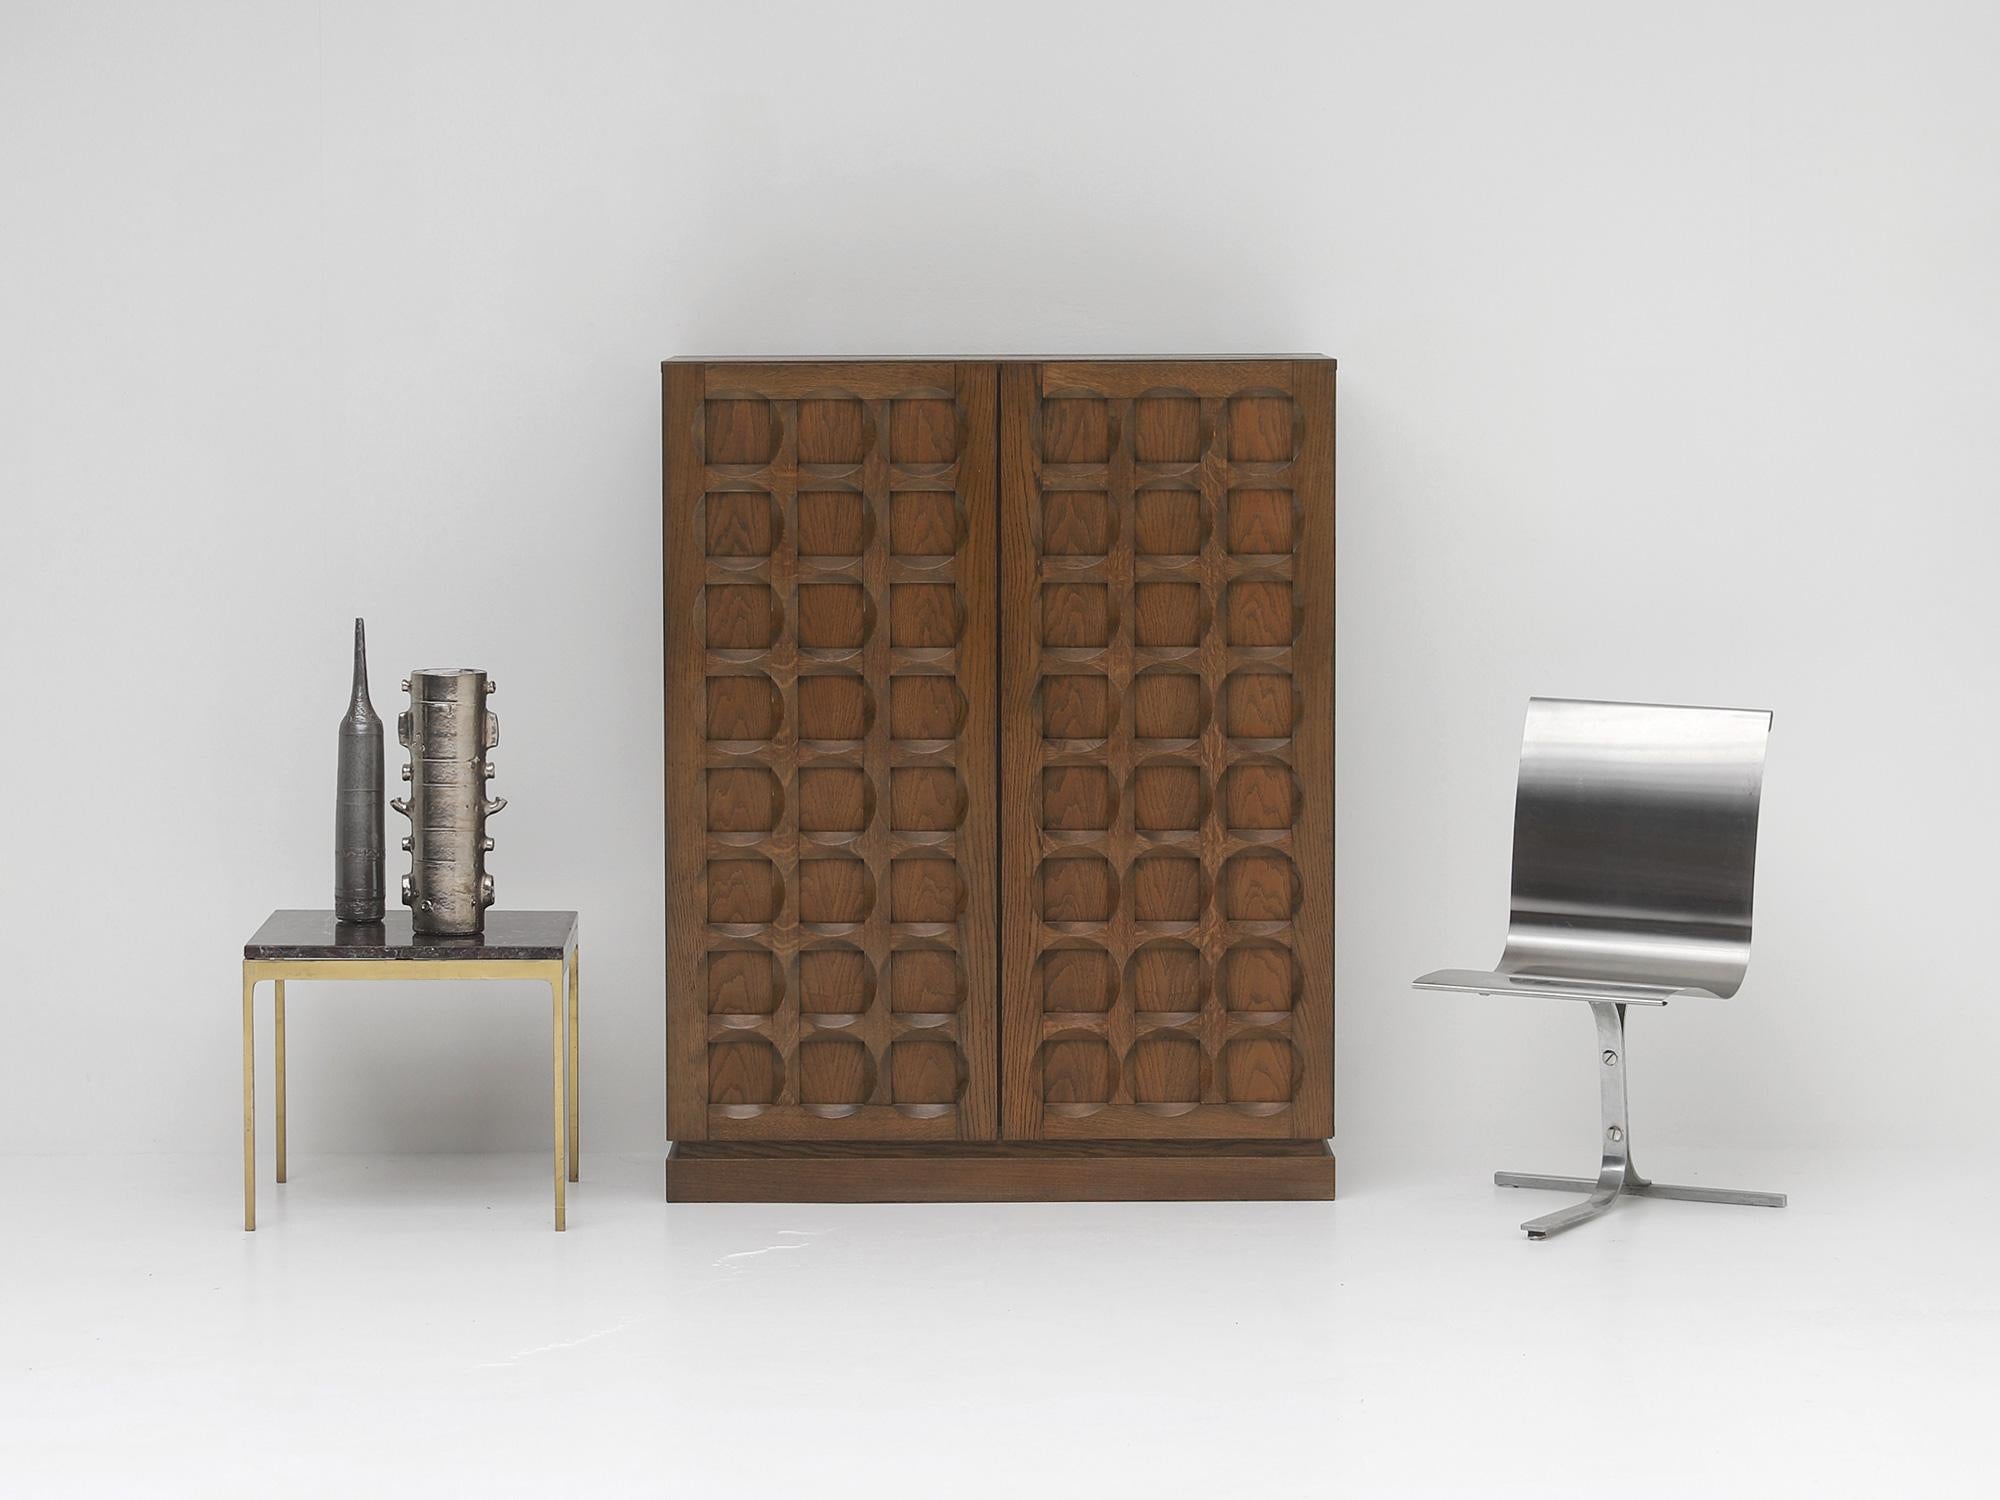 Graphical cabinet made out of oak, designed and built in the 1970s by Defour, Belgium. Defour was based in Hooglede and runned by the brothers Frans and Herman Defour. They had a progressive style of furniture design which the company received